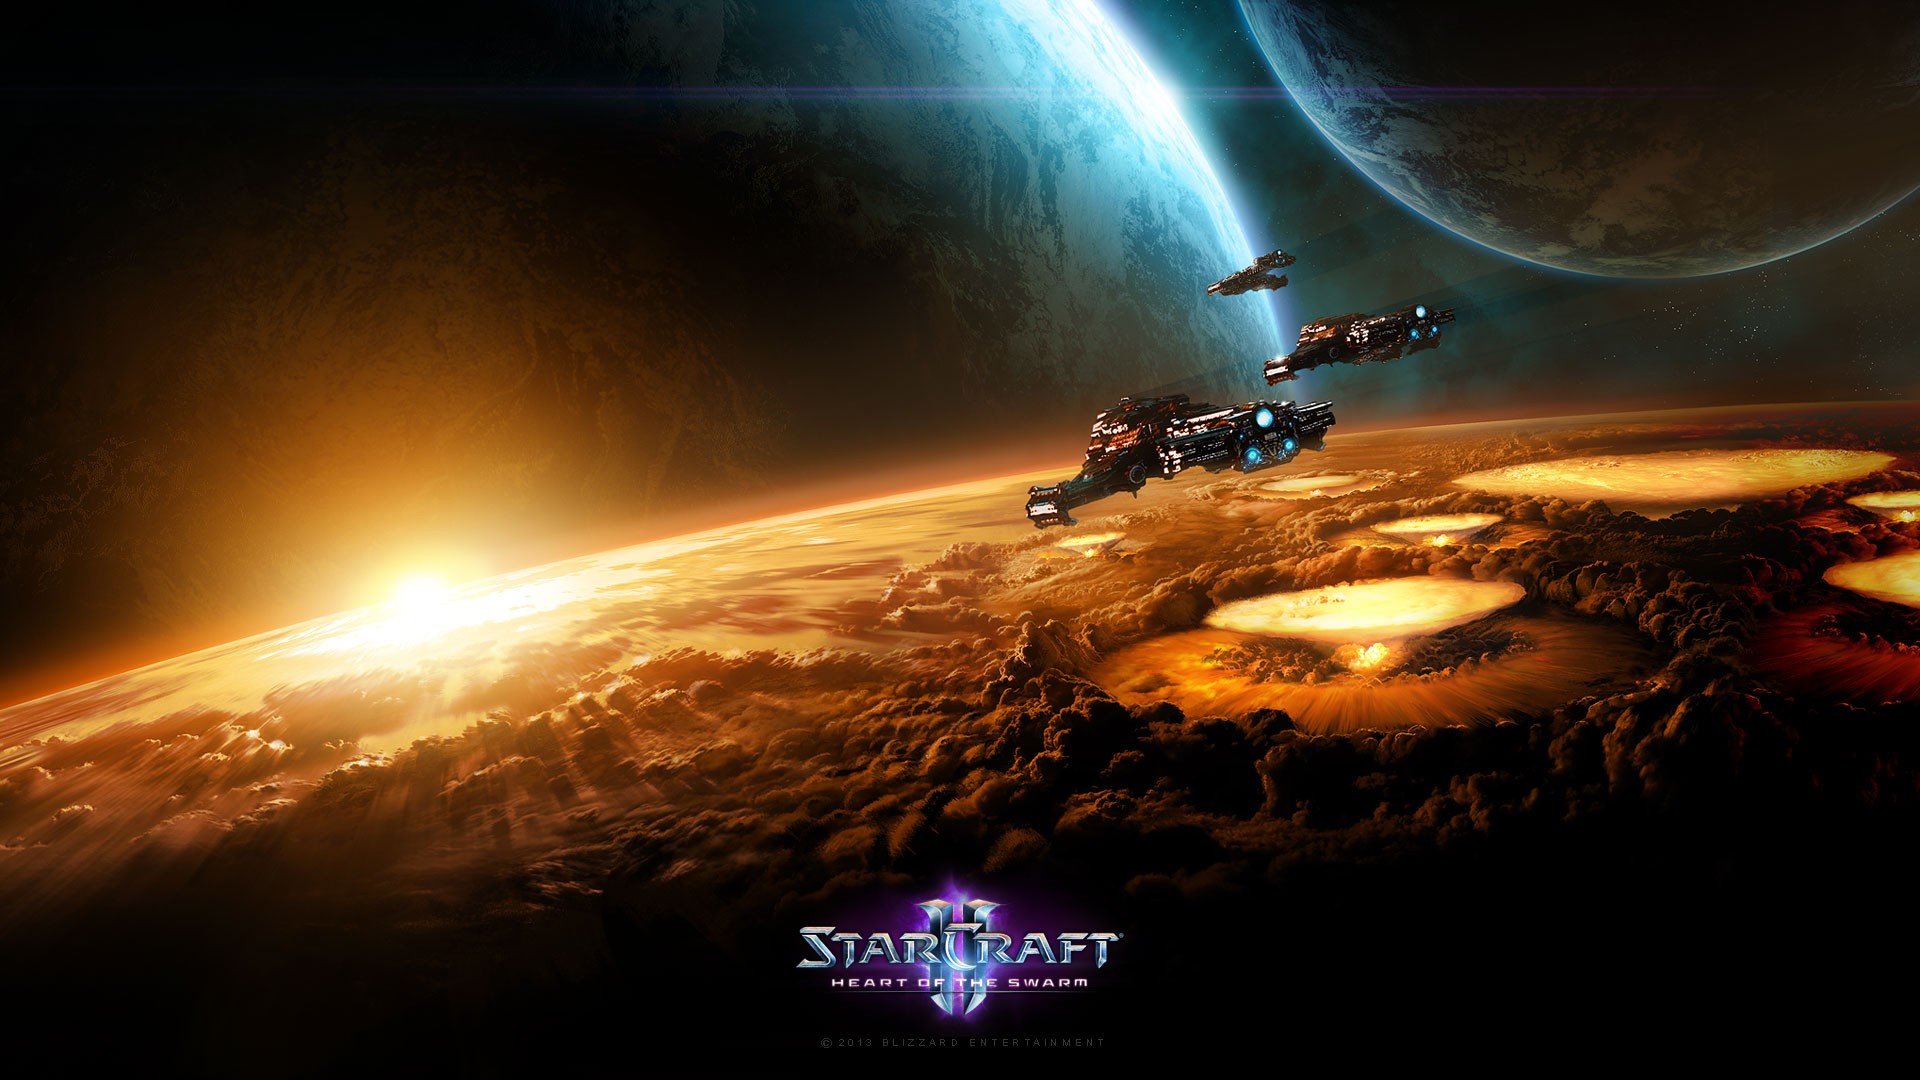 General 1920x1080 Starcraft II StarCraft II : Heart Of The Swarm space PC gaming Blizzard Entertainment science fiction spaceship planet video game art 2013 (Year)